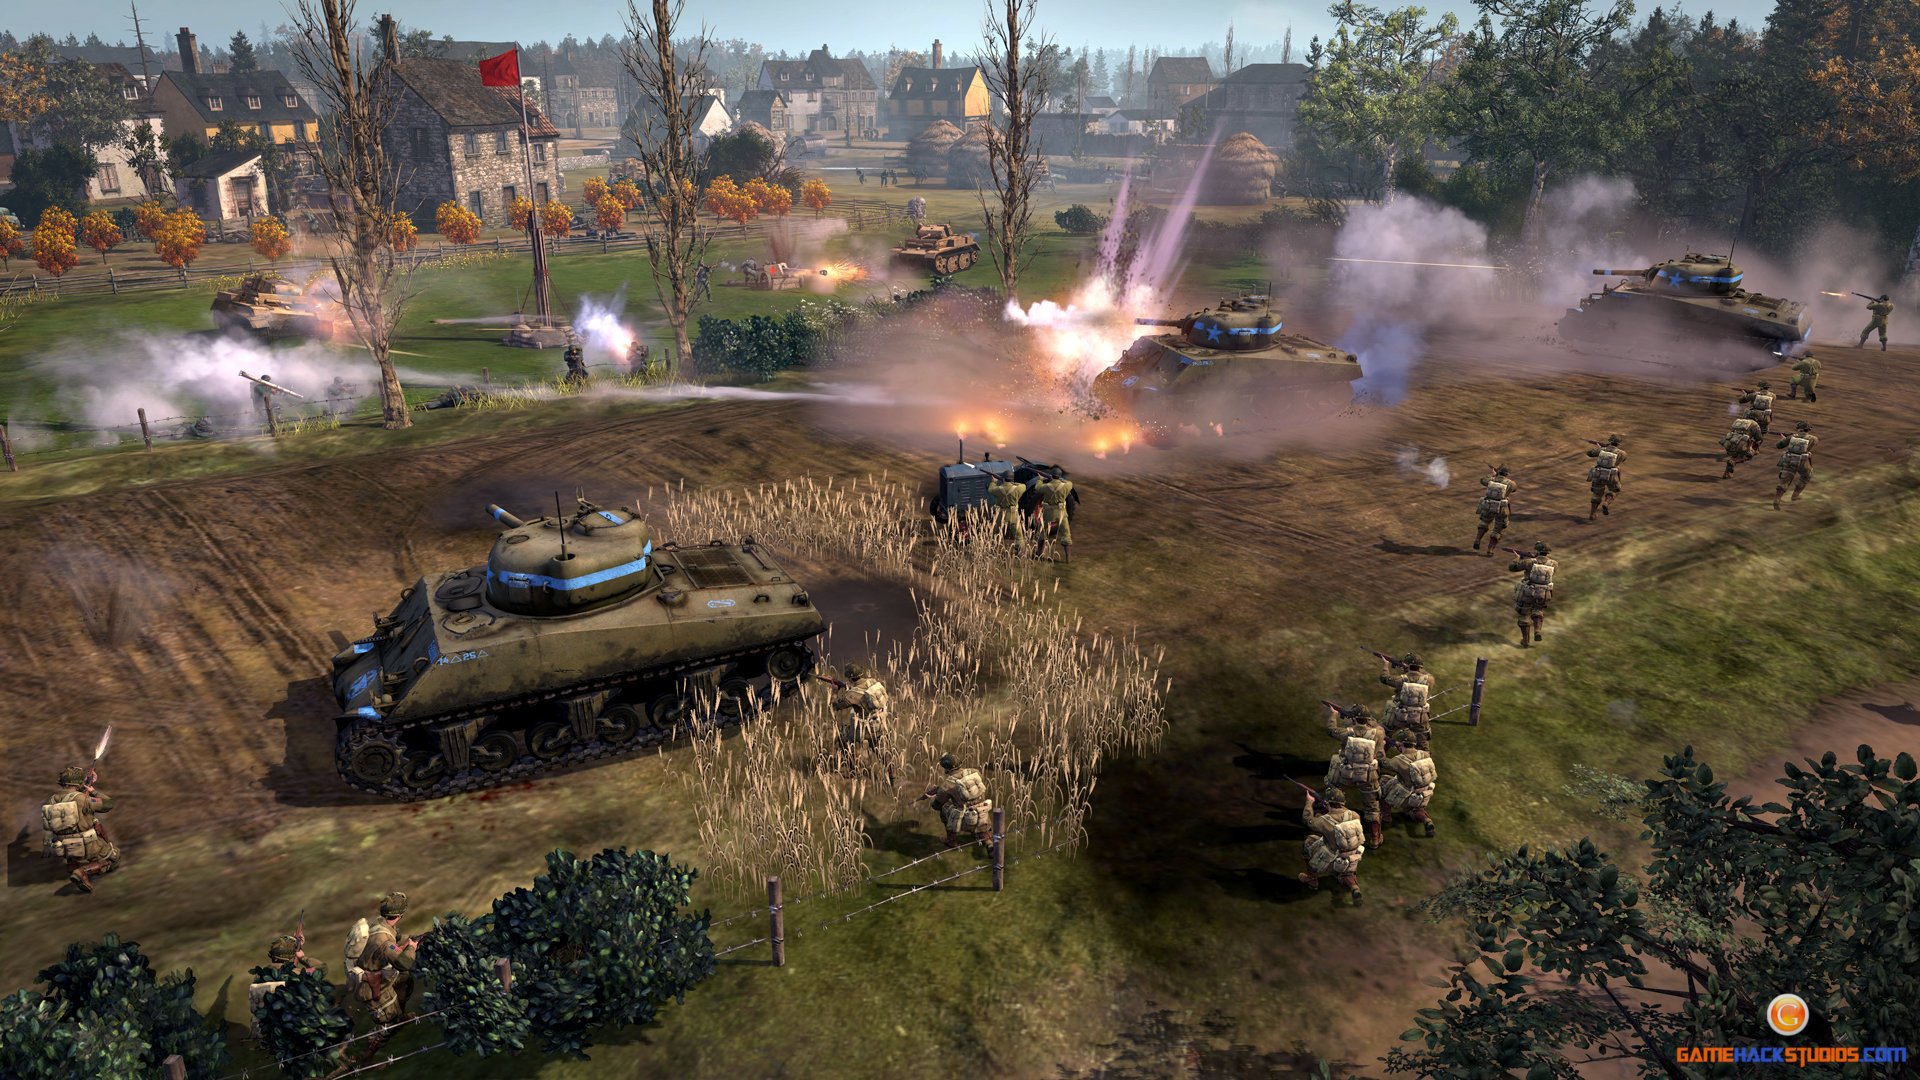 Company Of Heroes Free Download Full Version